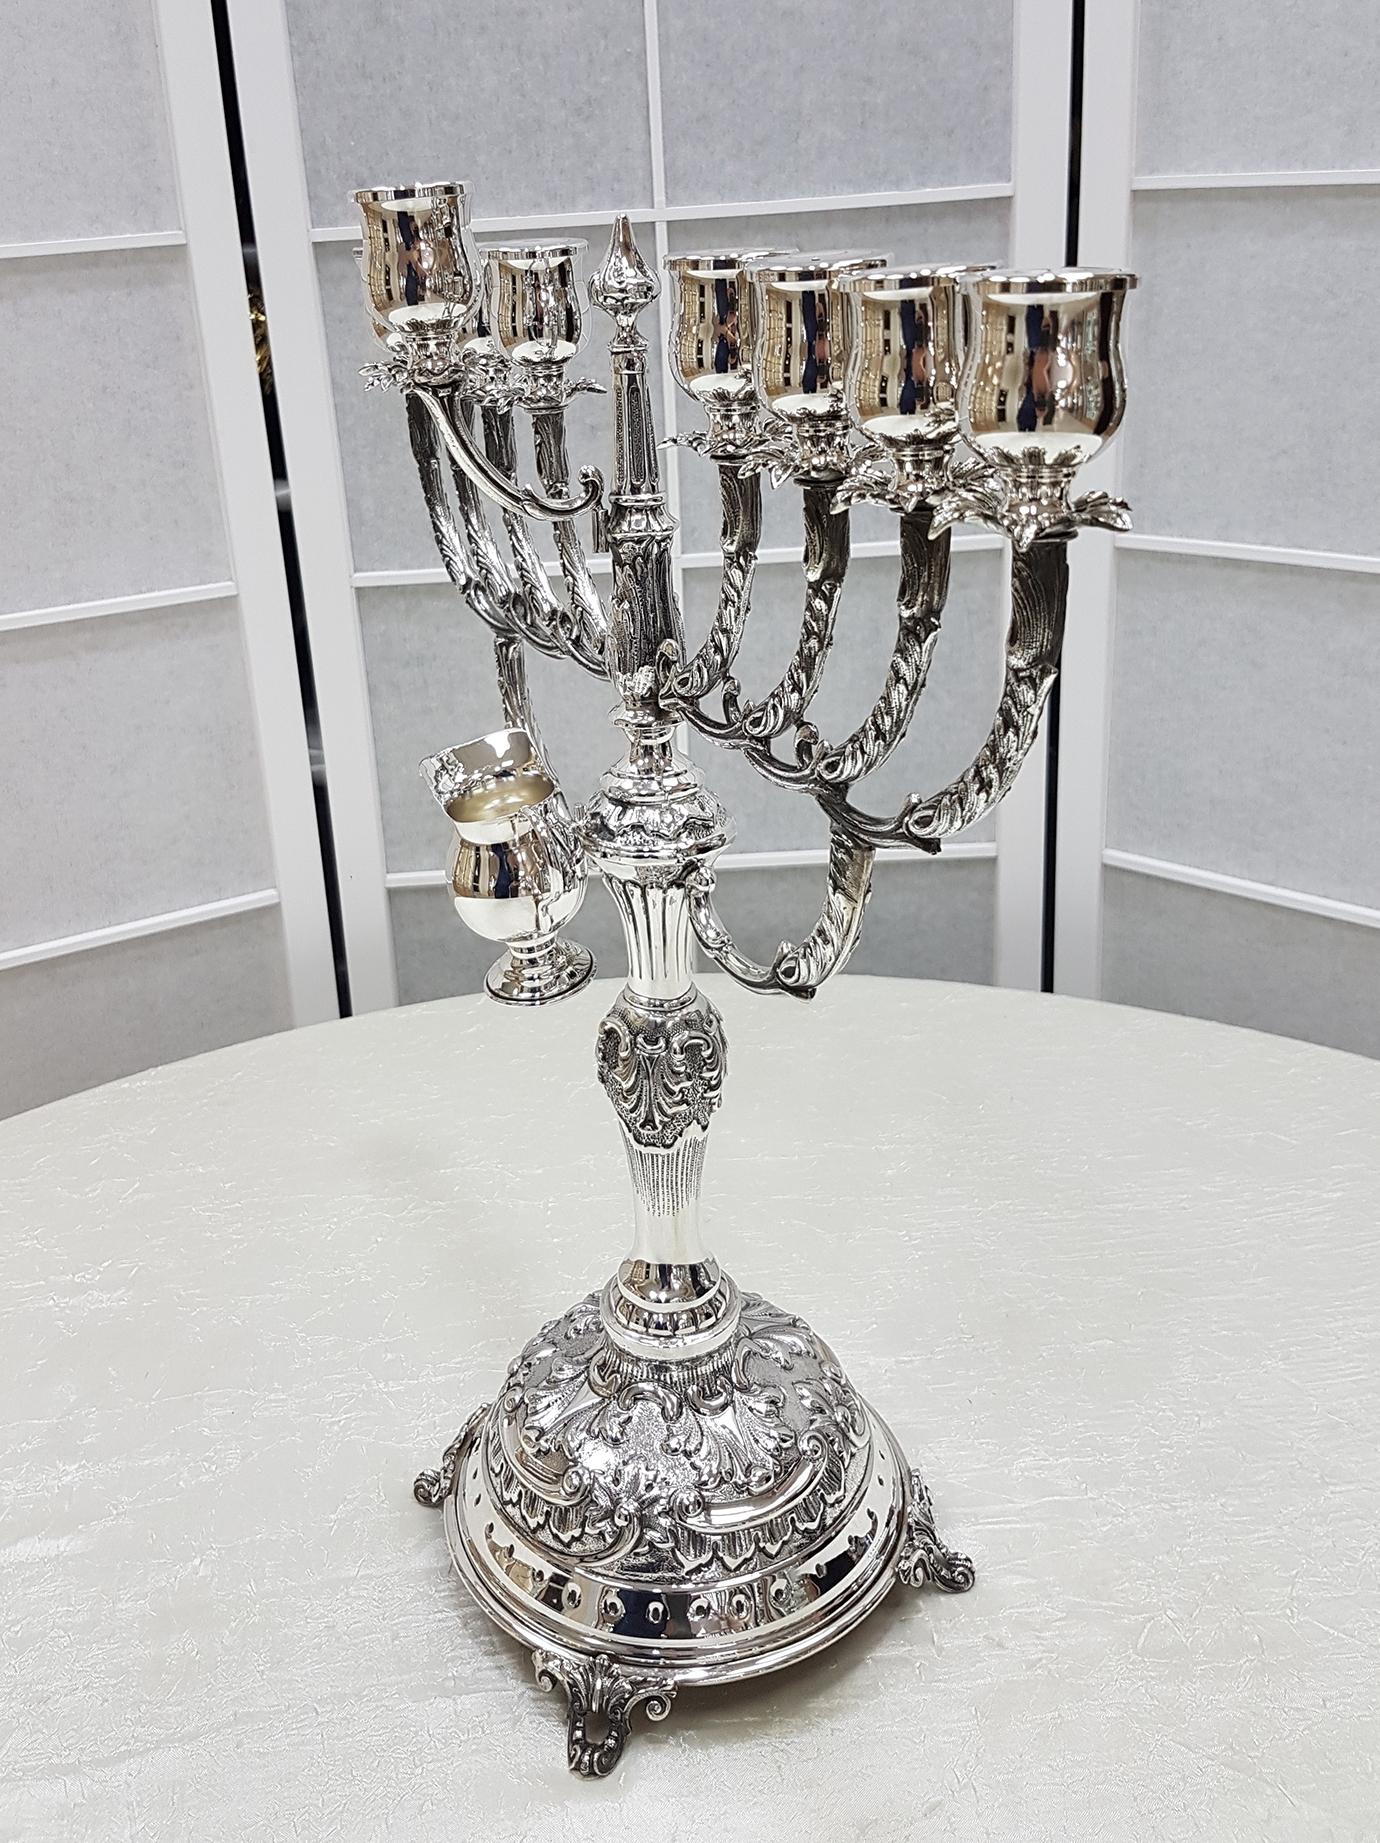 The Hanukkah menorah, also chanukiah or hanukkiah is a nine-branched candelabrum lit during the eight-day holiday of Hanukkah, as opposed to the seven-branched menorah used in the ancient Temple or as a symbol. 

On each night of Hanukkah, a new